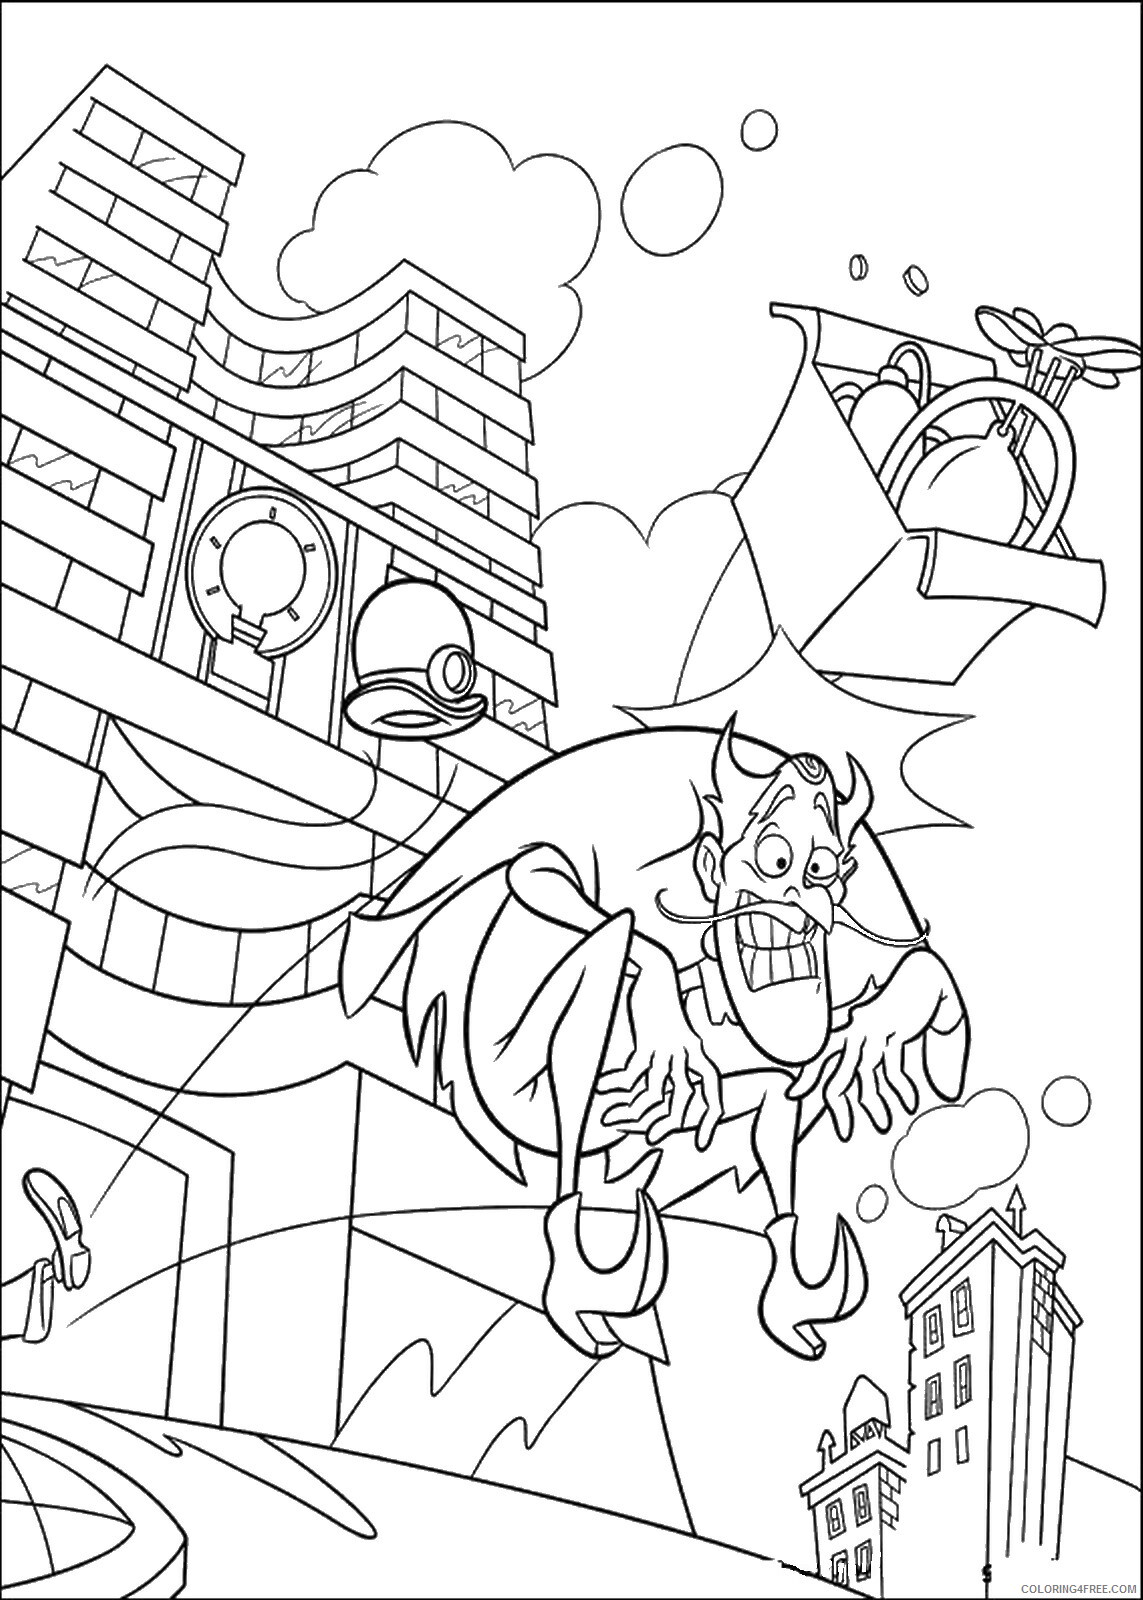 Meet the Robinsons Coloring Pages TV Film Printable 2020 04969 Coloring4free